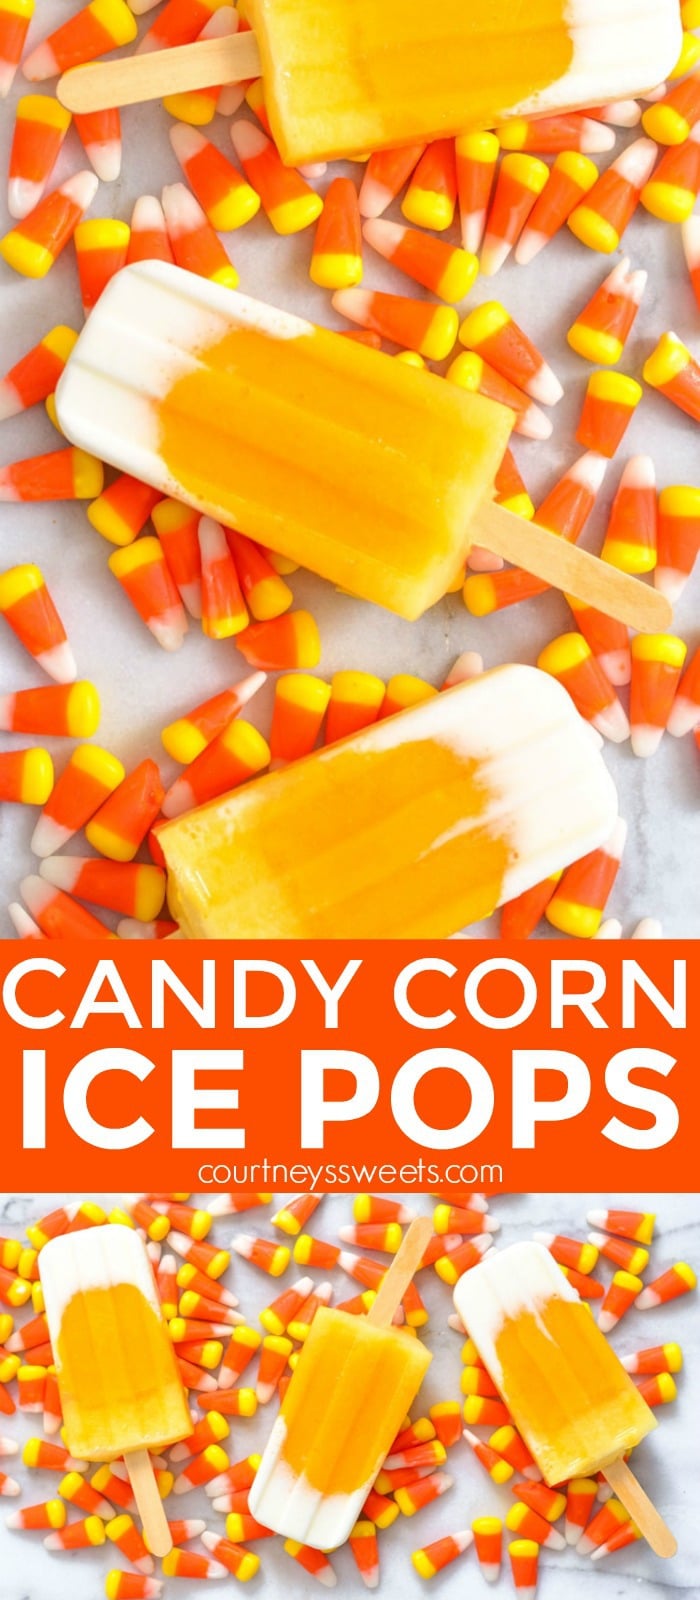 Our Candy Corn Popsicles on Mini Chef Mondays make a delicious fall treat, especially for Halloween entertaining. We make ice pops regularly and this is a combination of my daughter's favorites! We use fresh fruit and yogurt for the layers. Healthy whole food ingredients for a nutritious dessert.